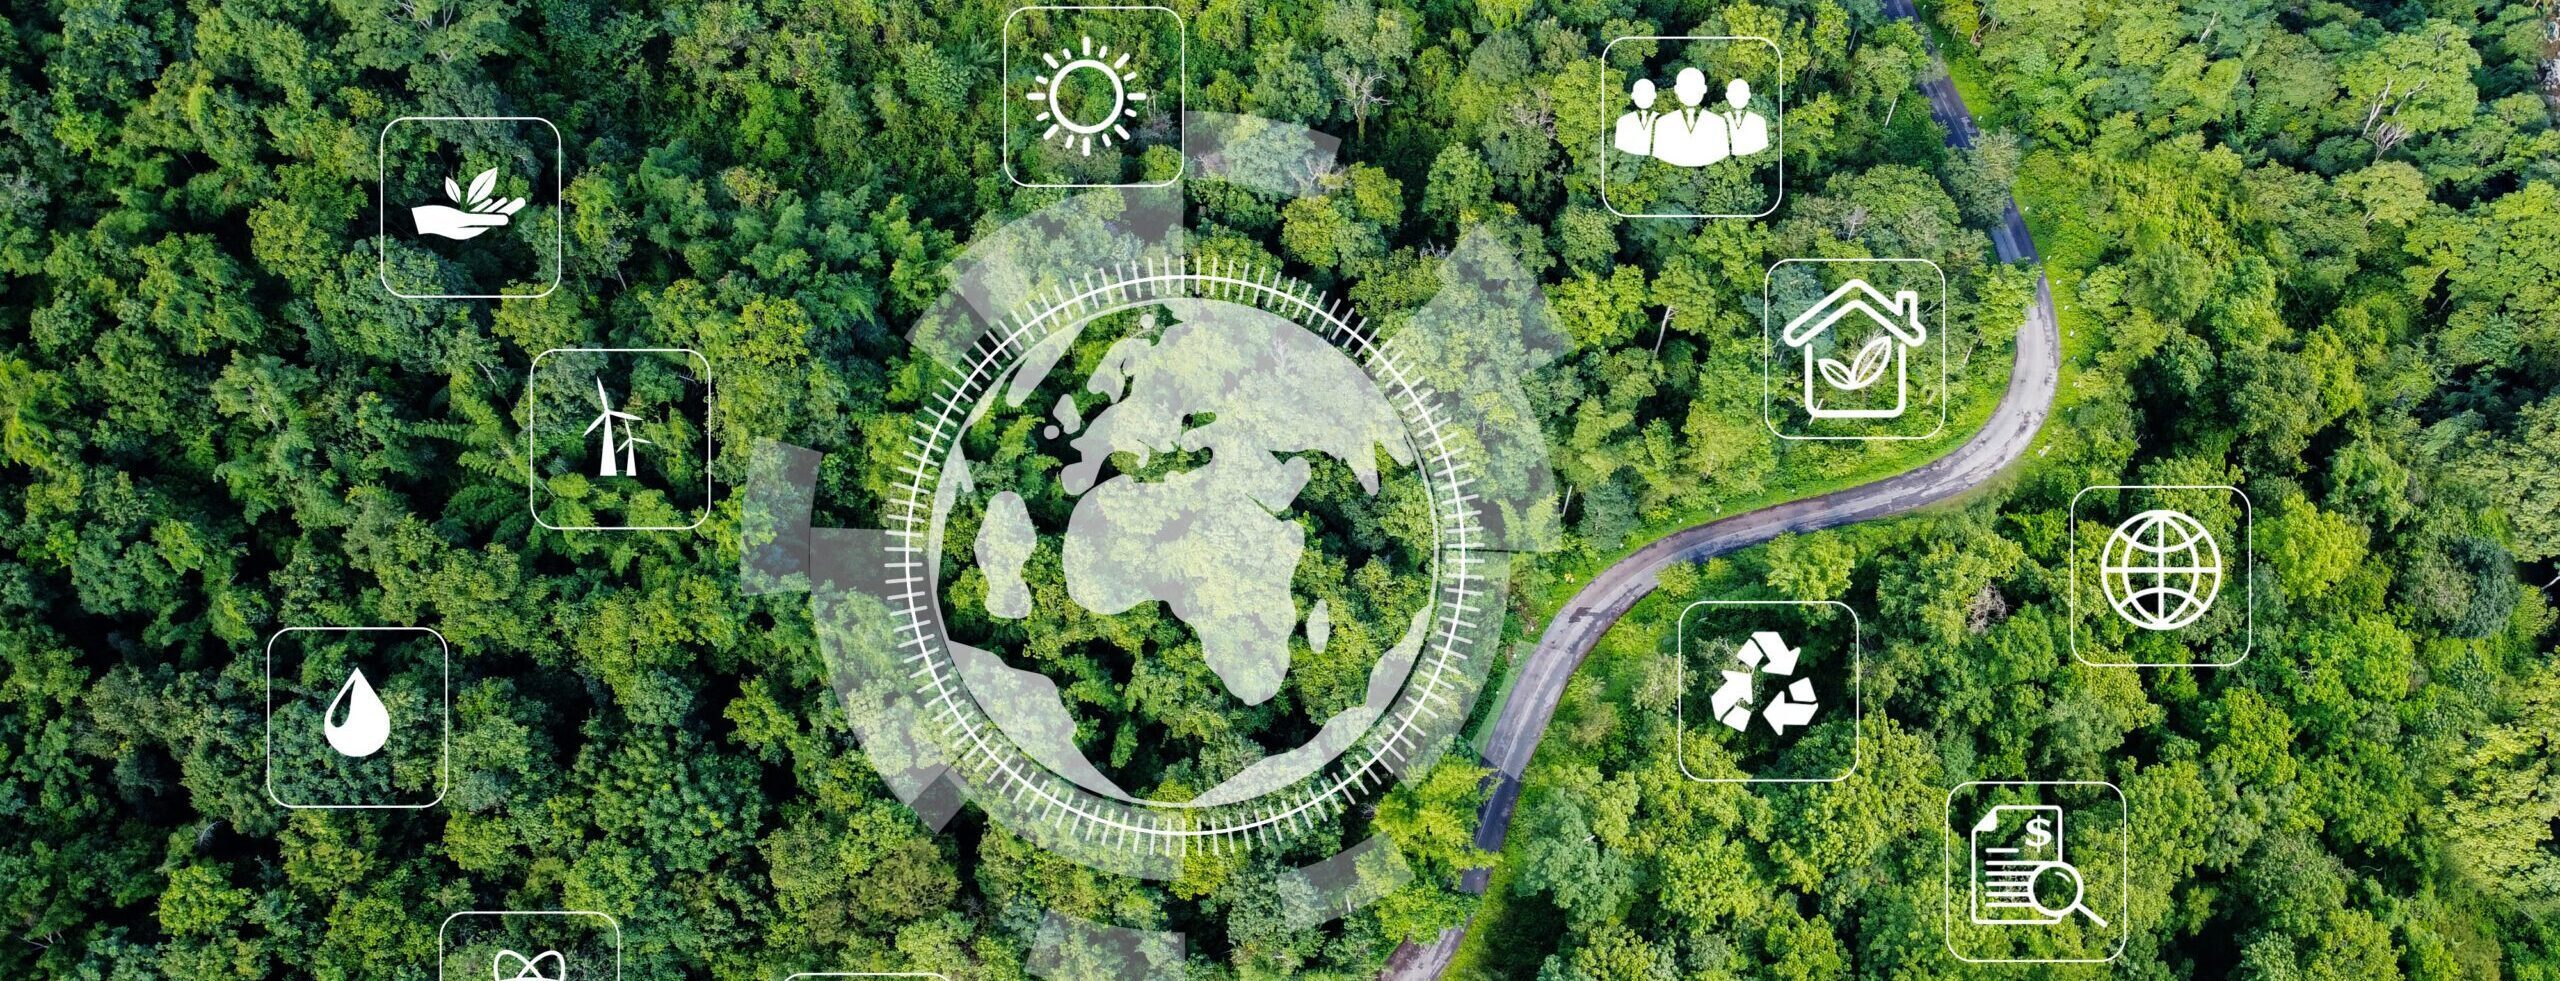 Birds eye view of a forest with ESG symbols